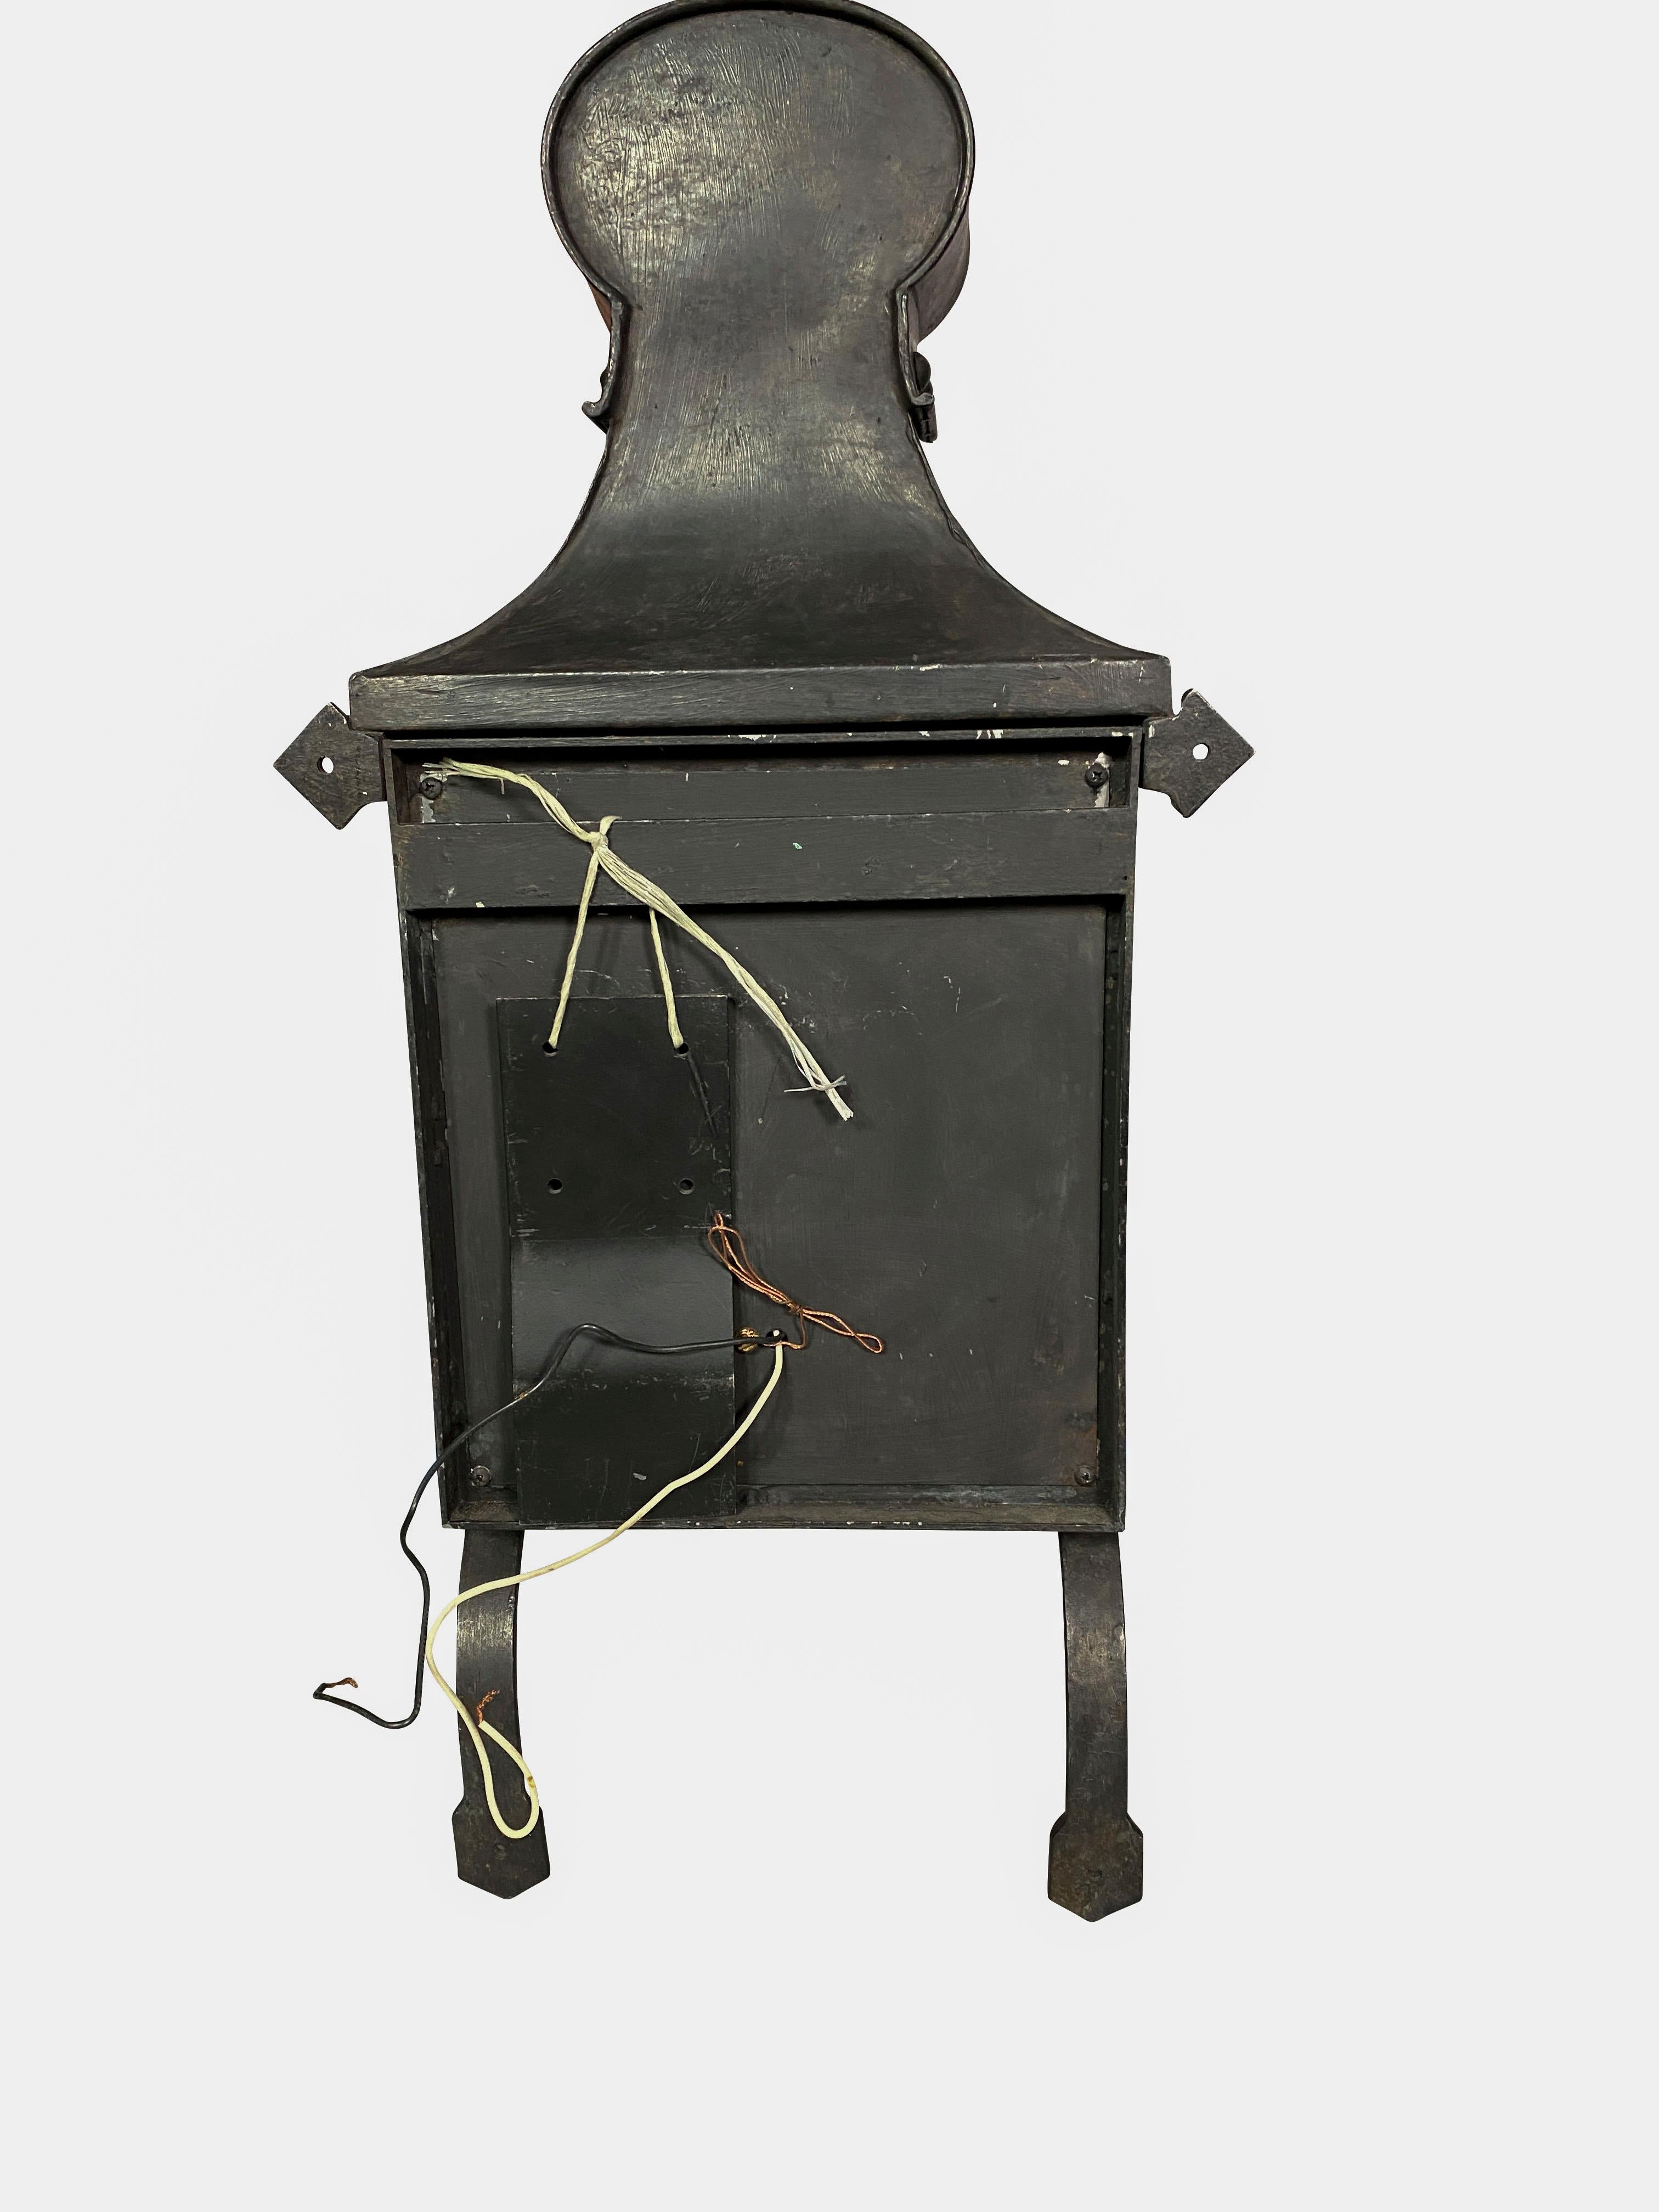 American Arts and Crafts Wrought Iron Wall Lantern